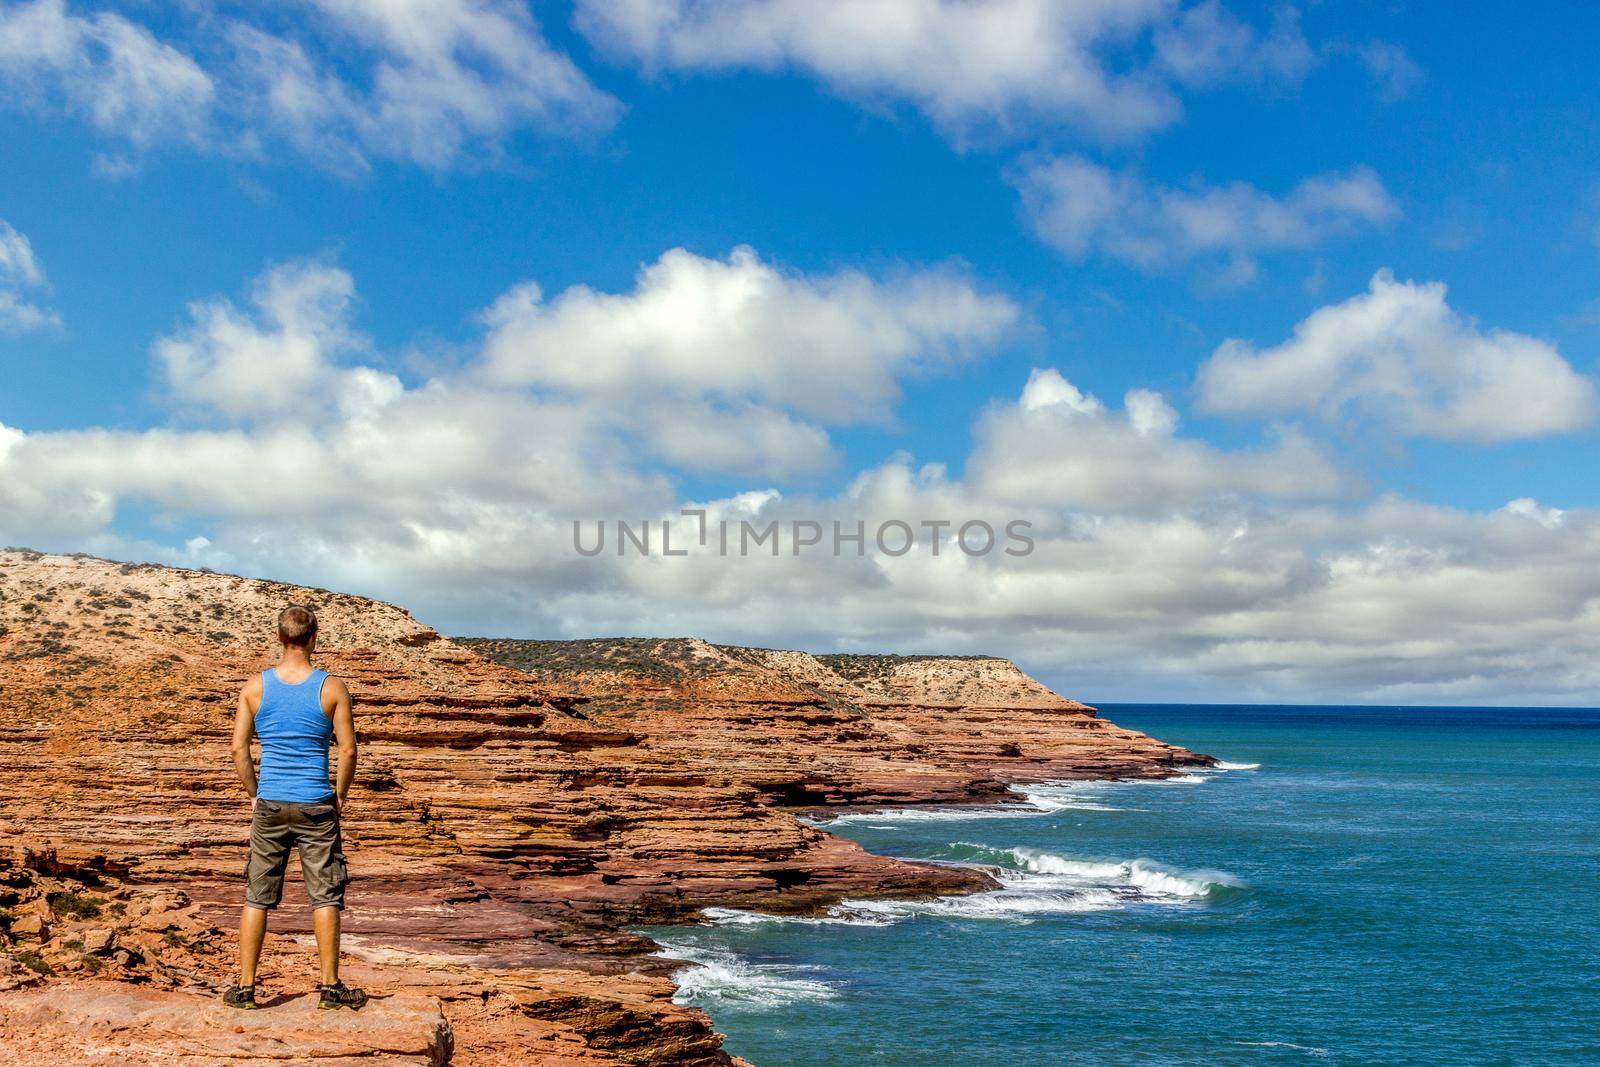 Pot Alley in Kalbarri National Park is where rugged rock cliff meet the Indian Ocean along the Australia's coast.